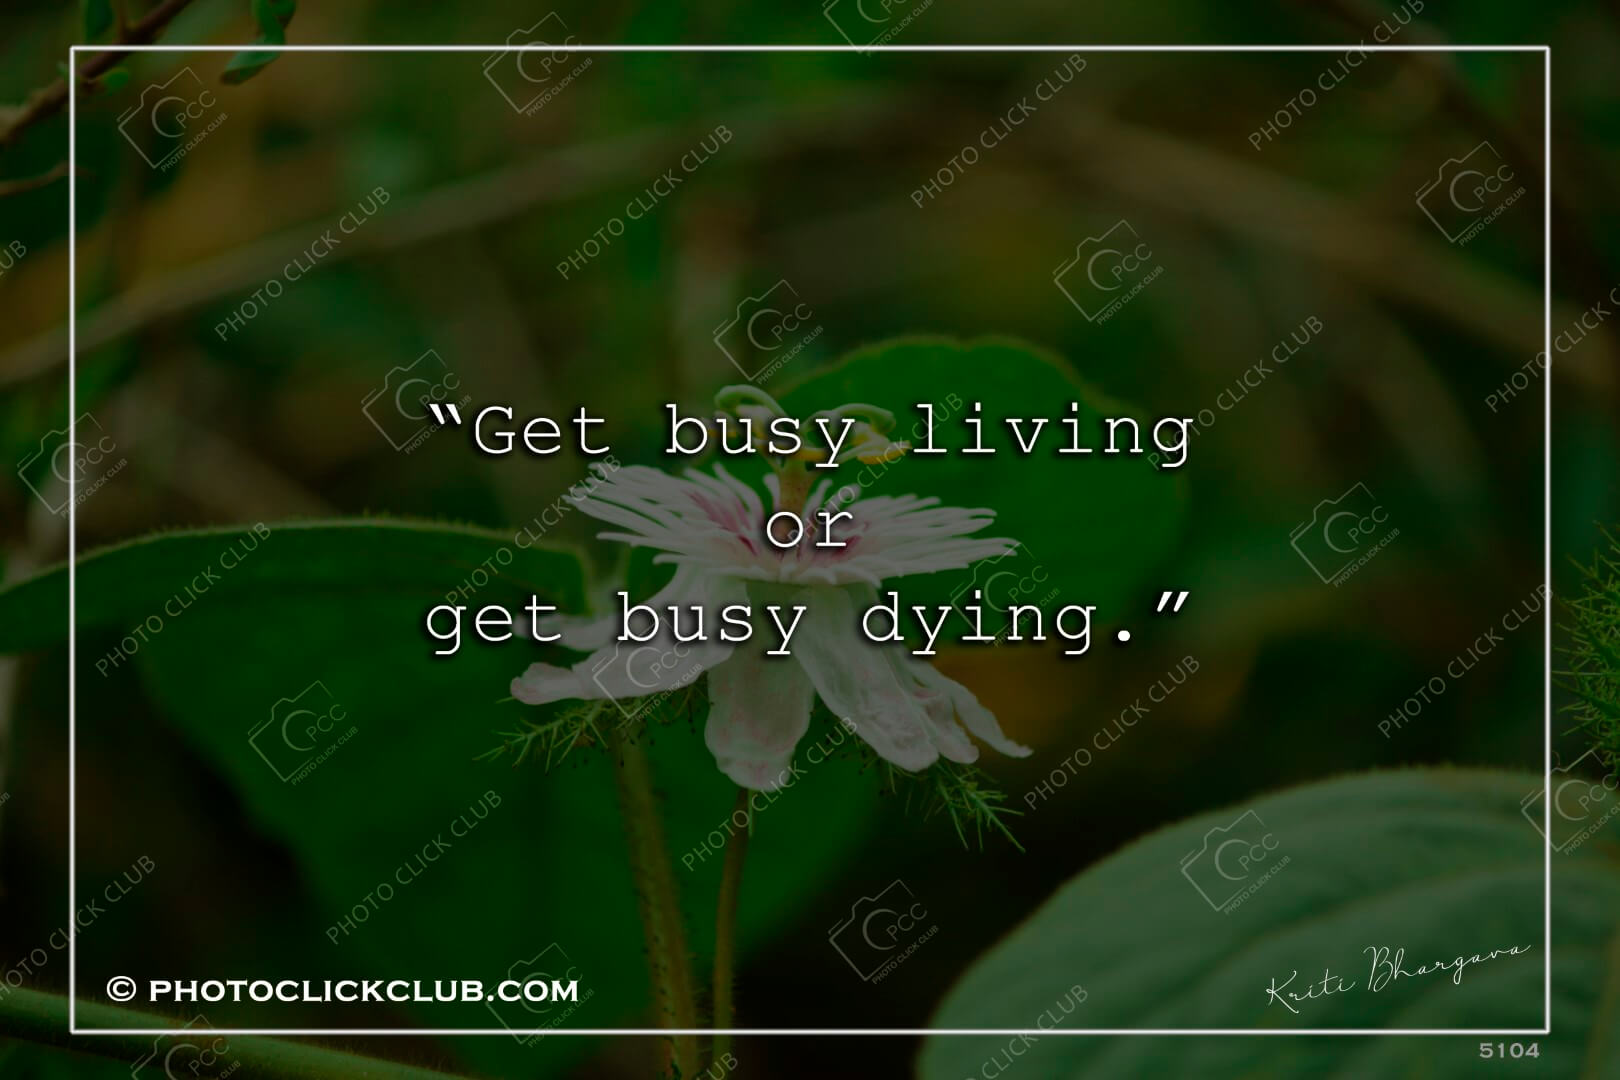 Living and Dying Quotes - by photoclickclub